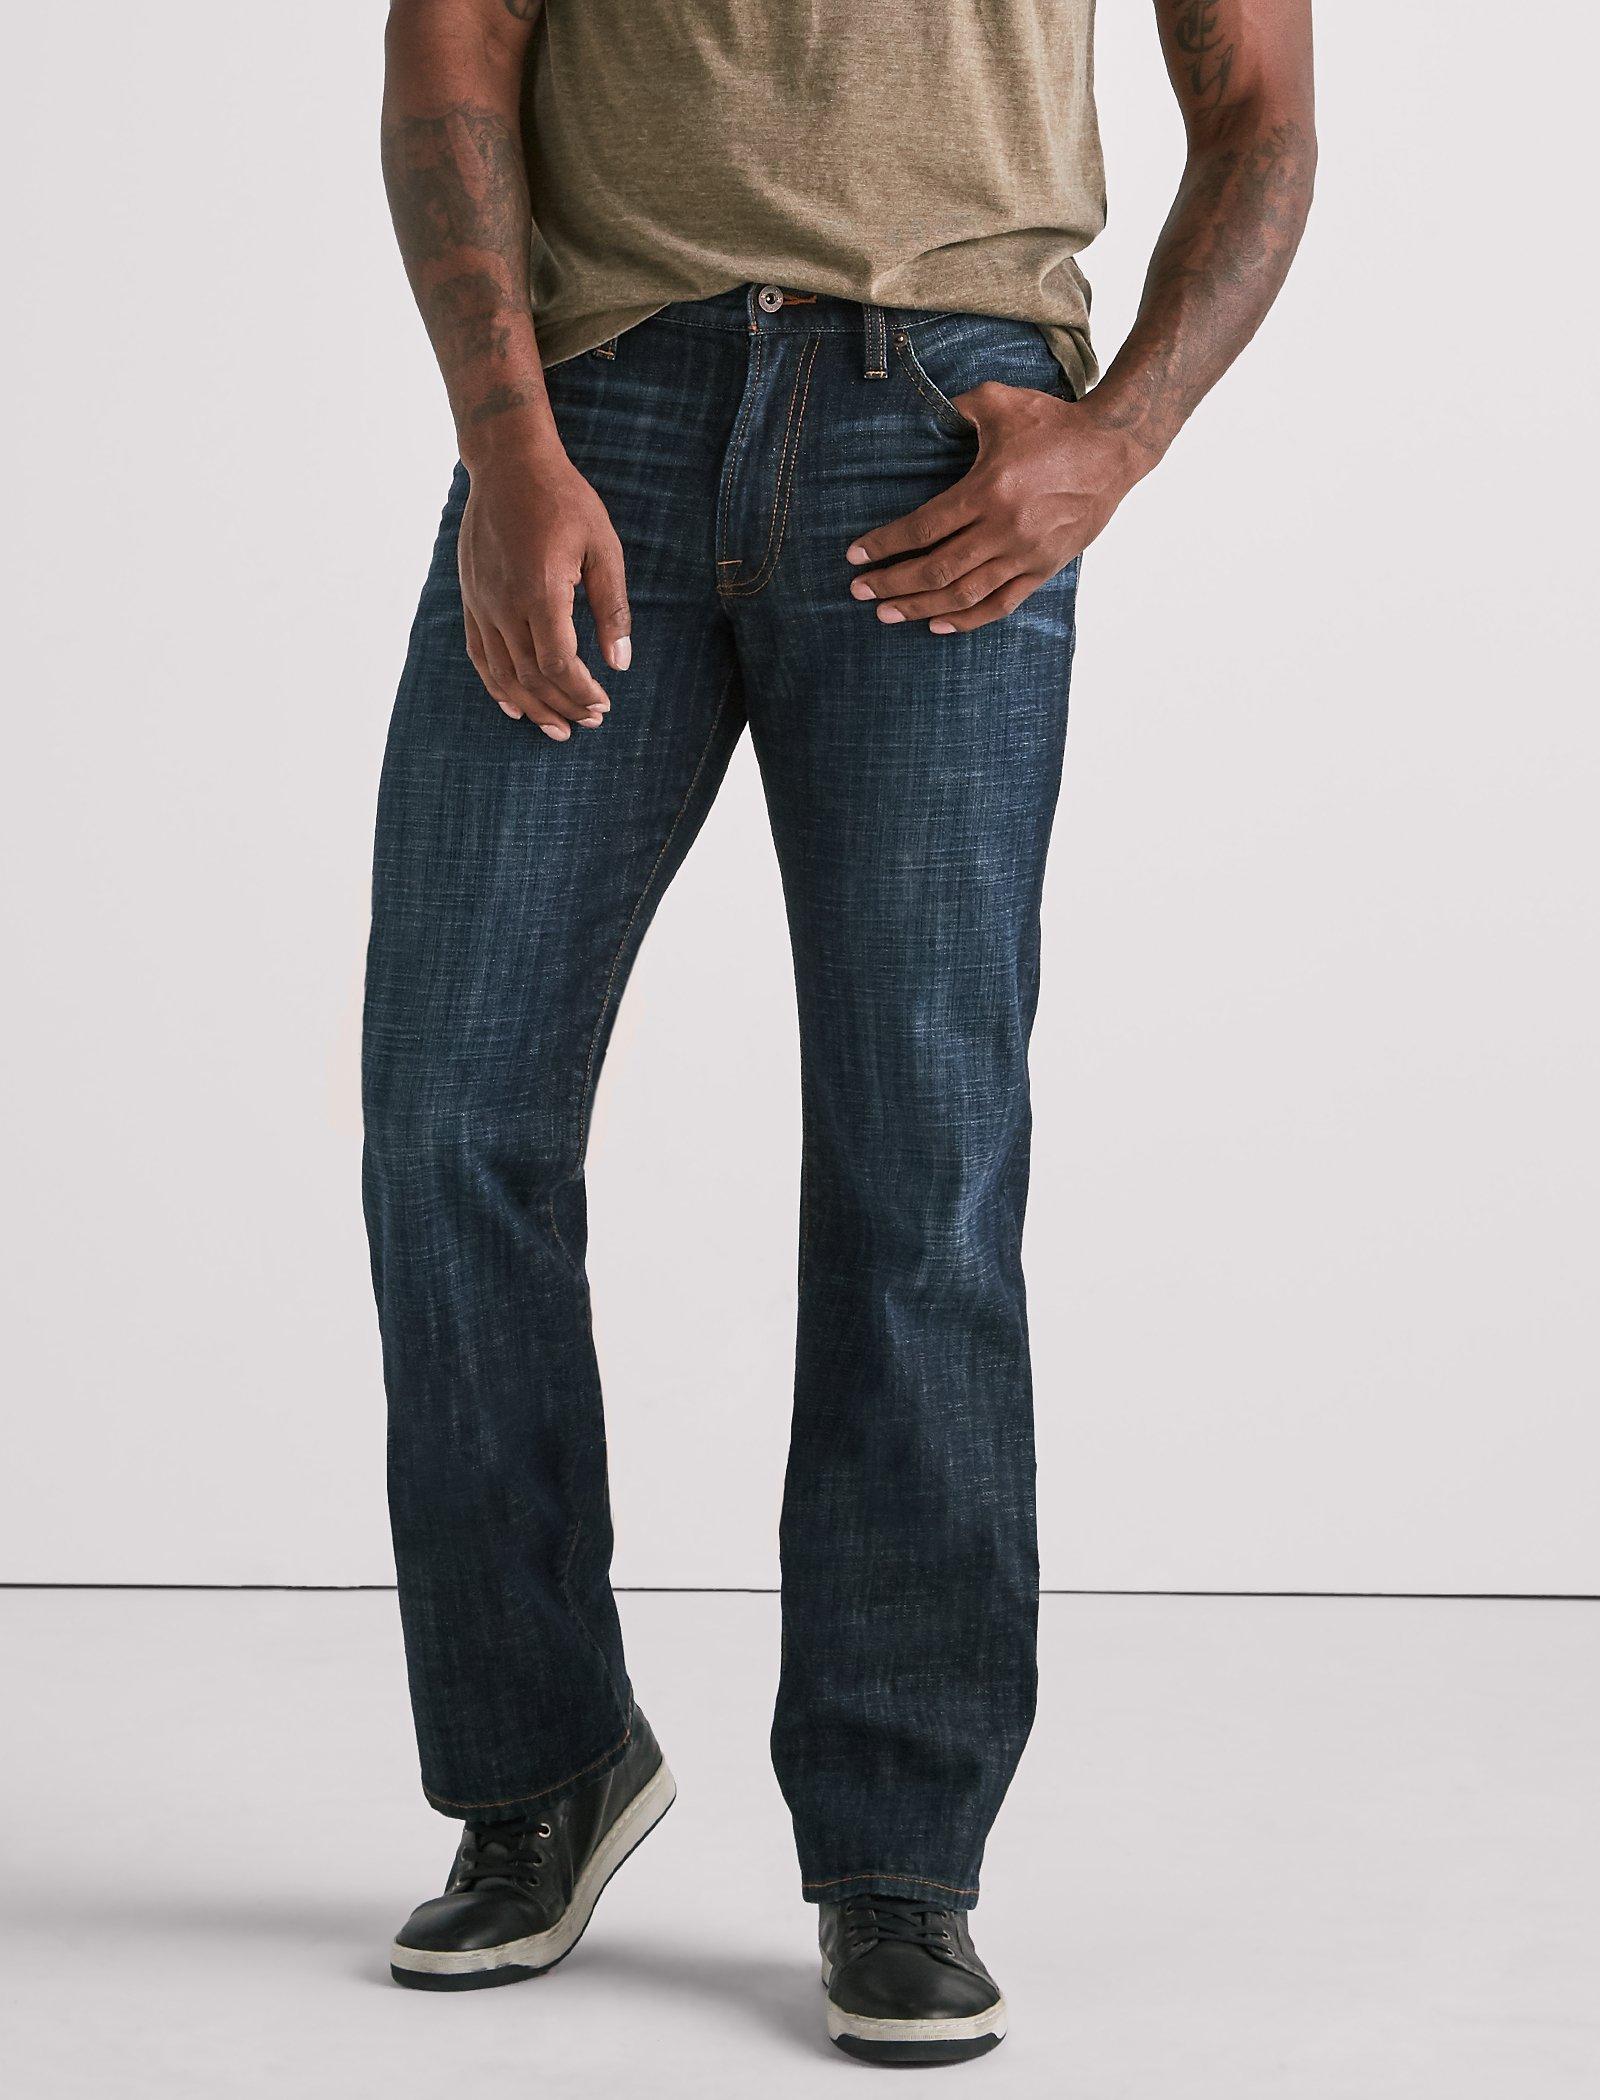 mens lucky jeans 361 vintage straight